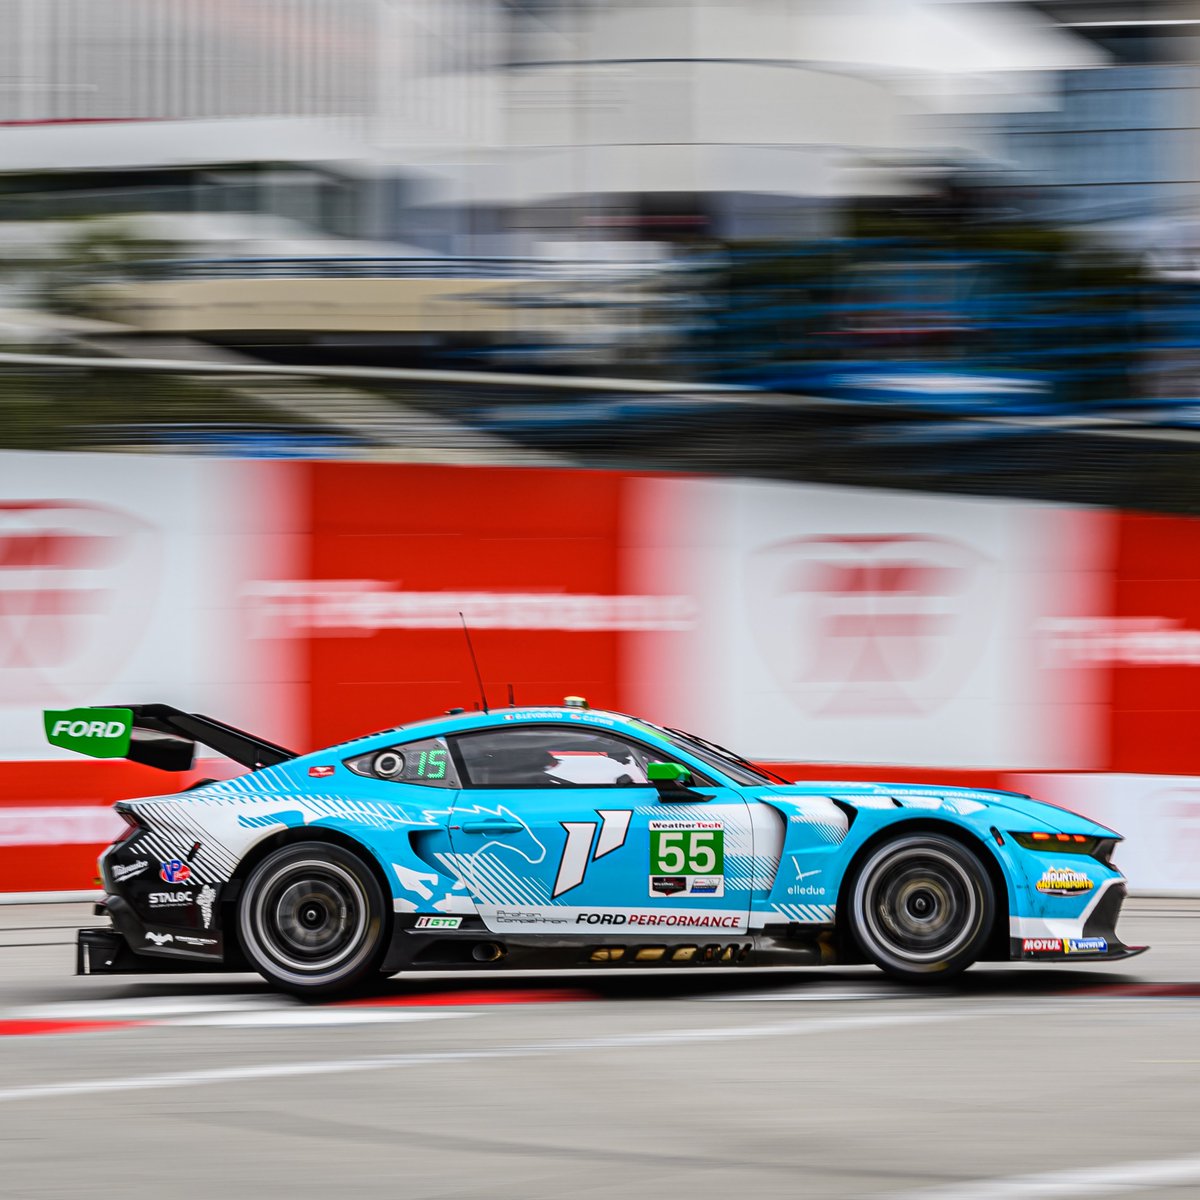 #IMSA | @ProtonRacing and its @FordMustang GT3 will race the clock later today through the streets of Long Beach during @IMSA GTD class qualifying.

➡️ imsa.com/tvlive/

#BredtoRaceFP